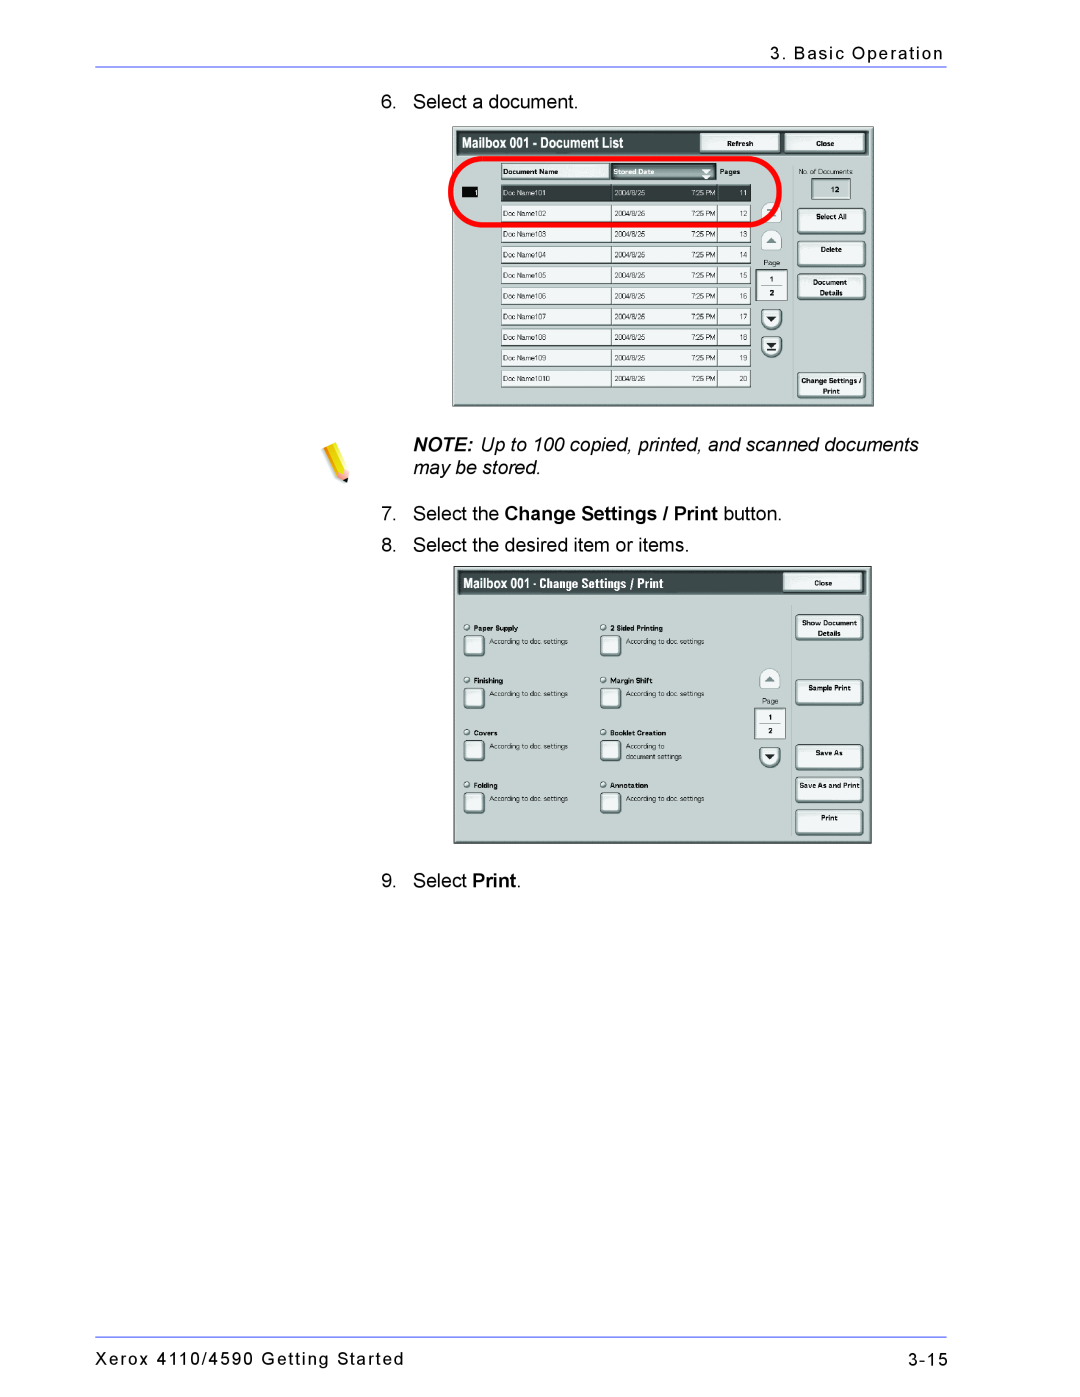 Xerox 4110 NOTE Up to 100 copied, printed, and scanned documents may be stored, Select the Change Settings / Print button 